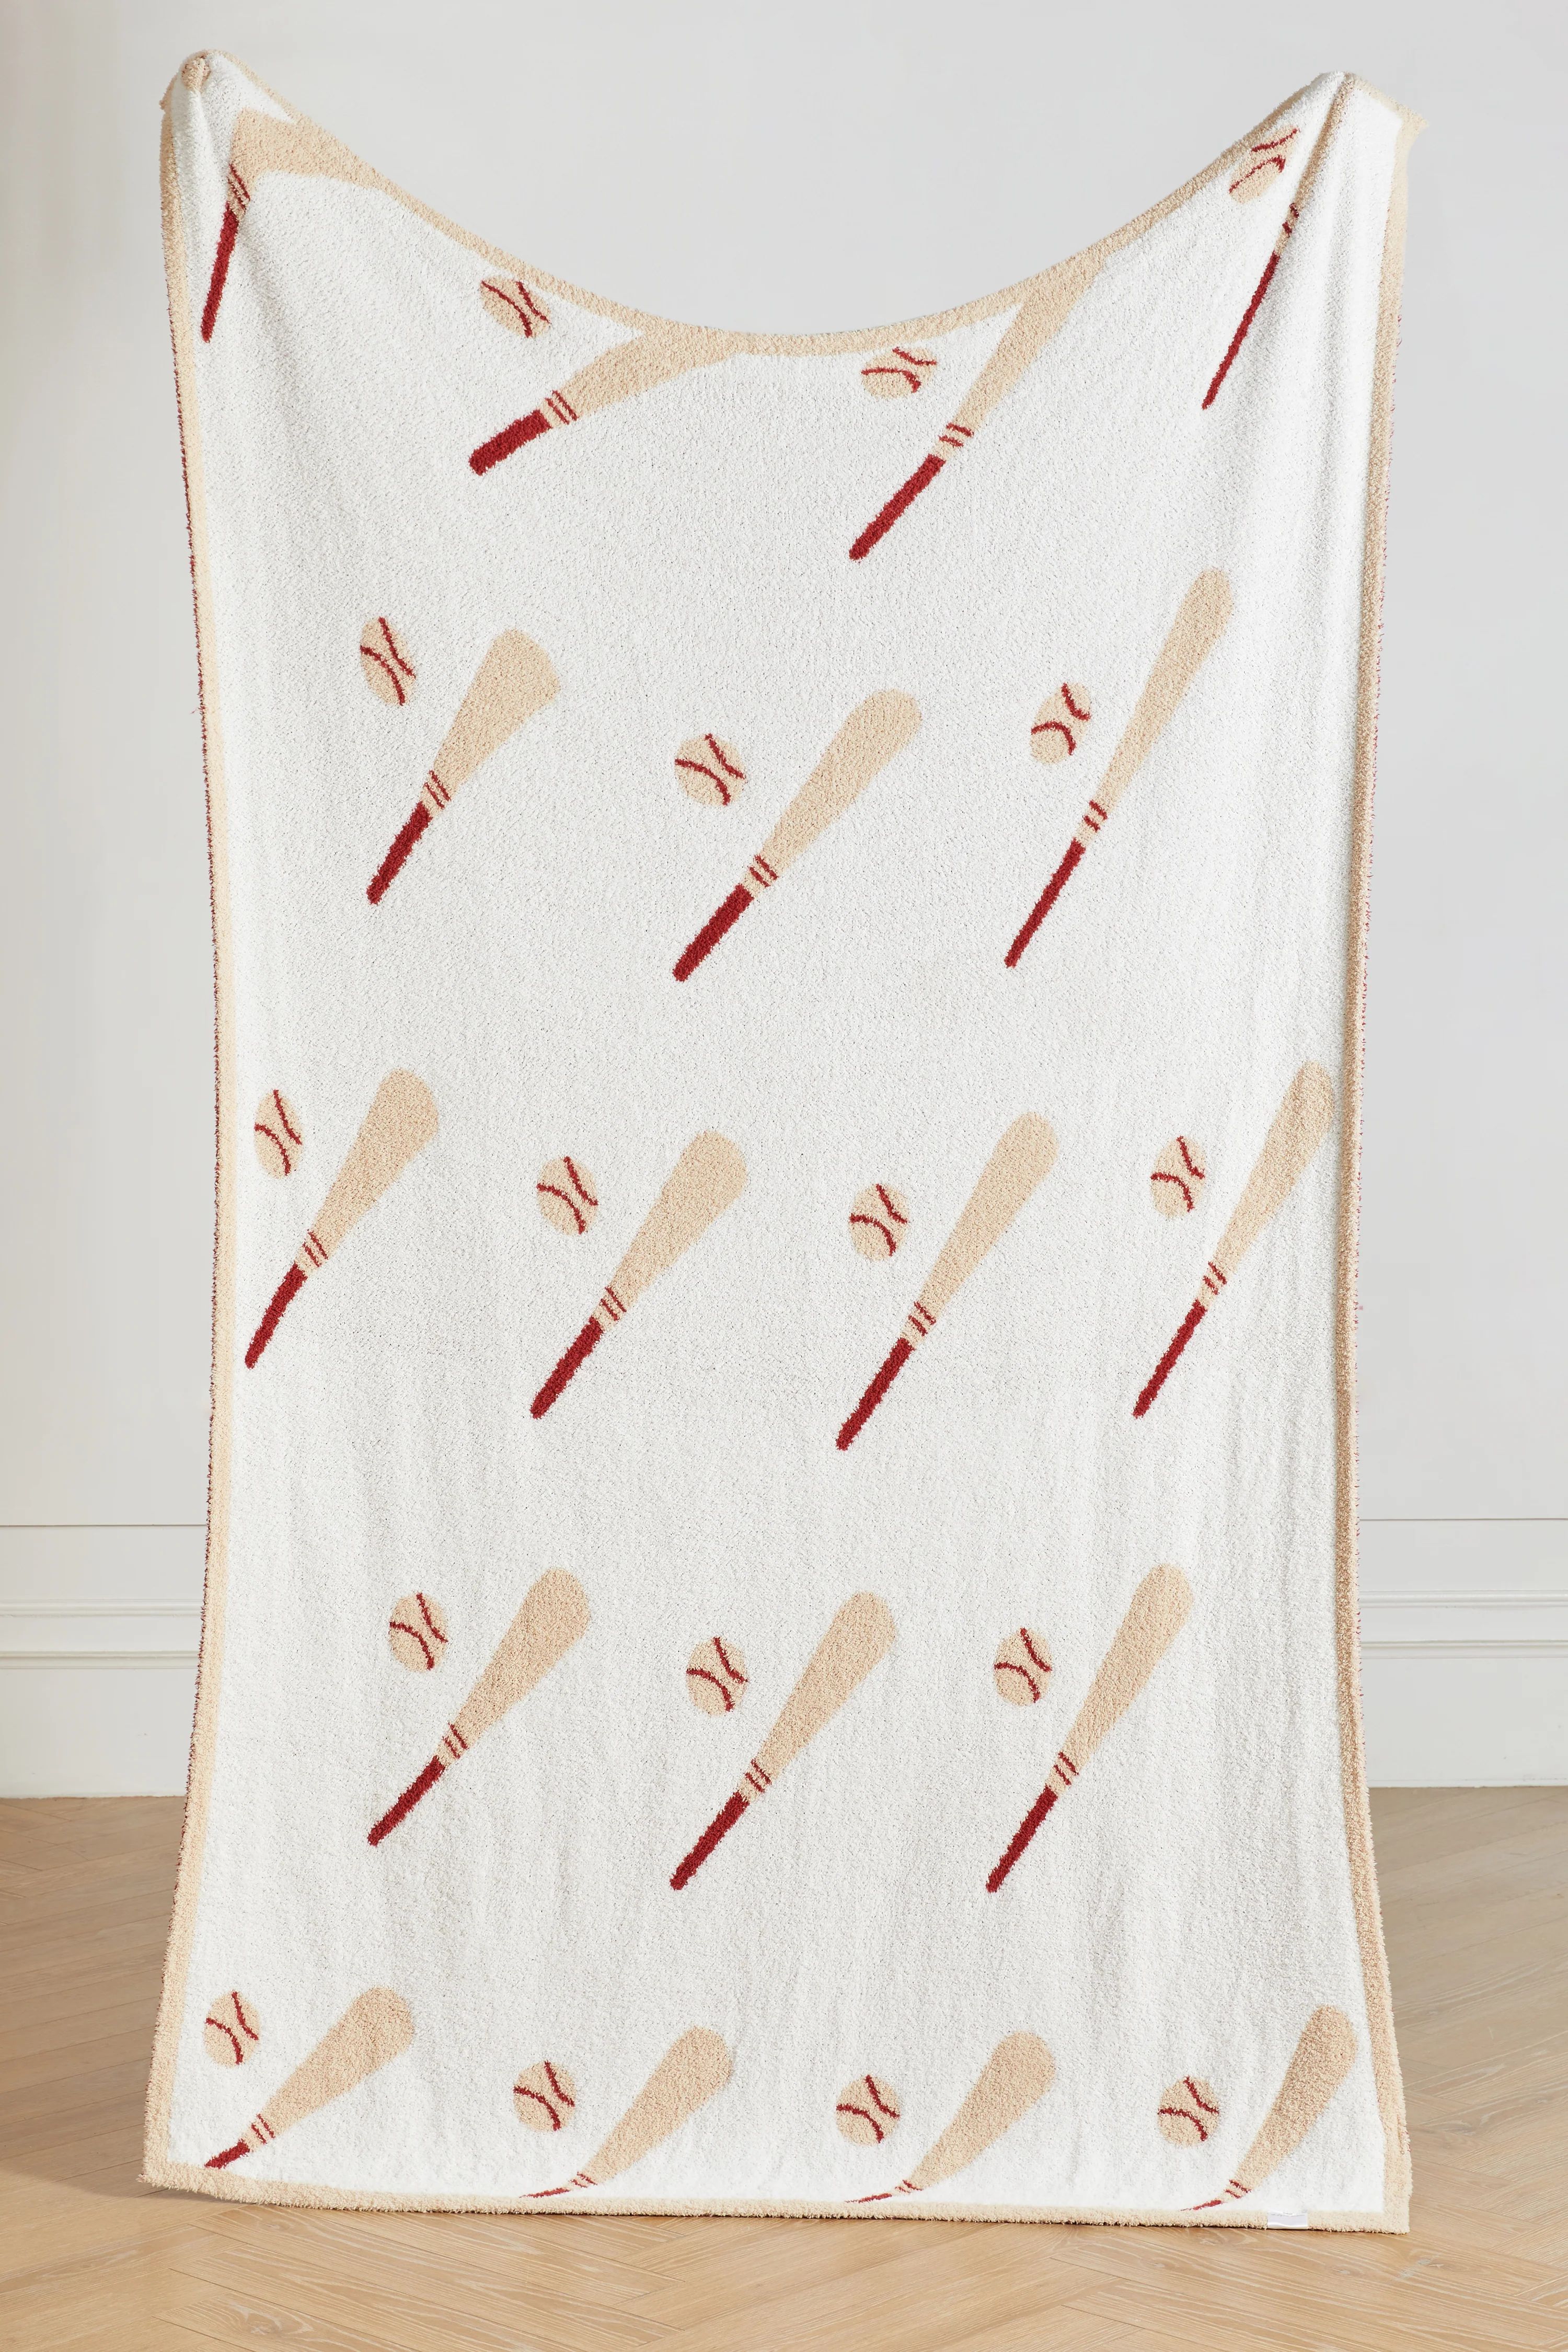 Baseball Buttery Blanket | The Styled Collection